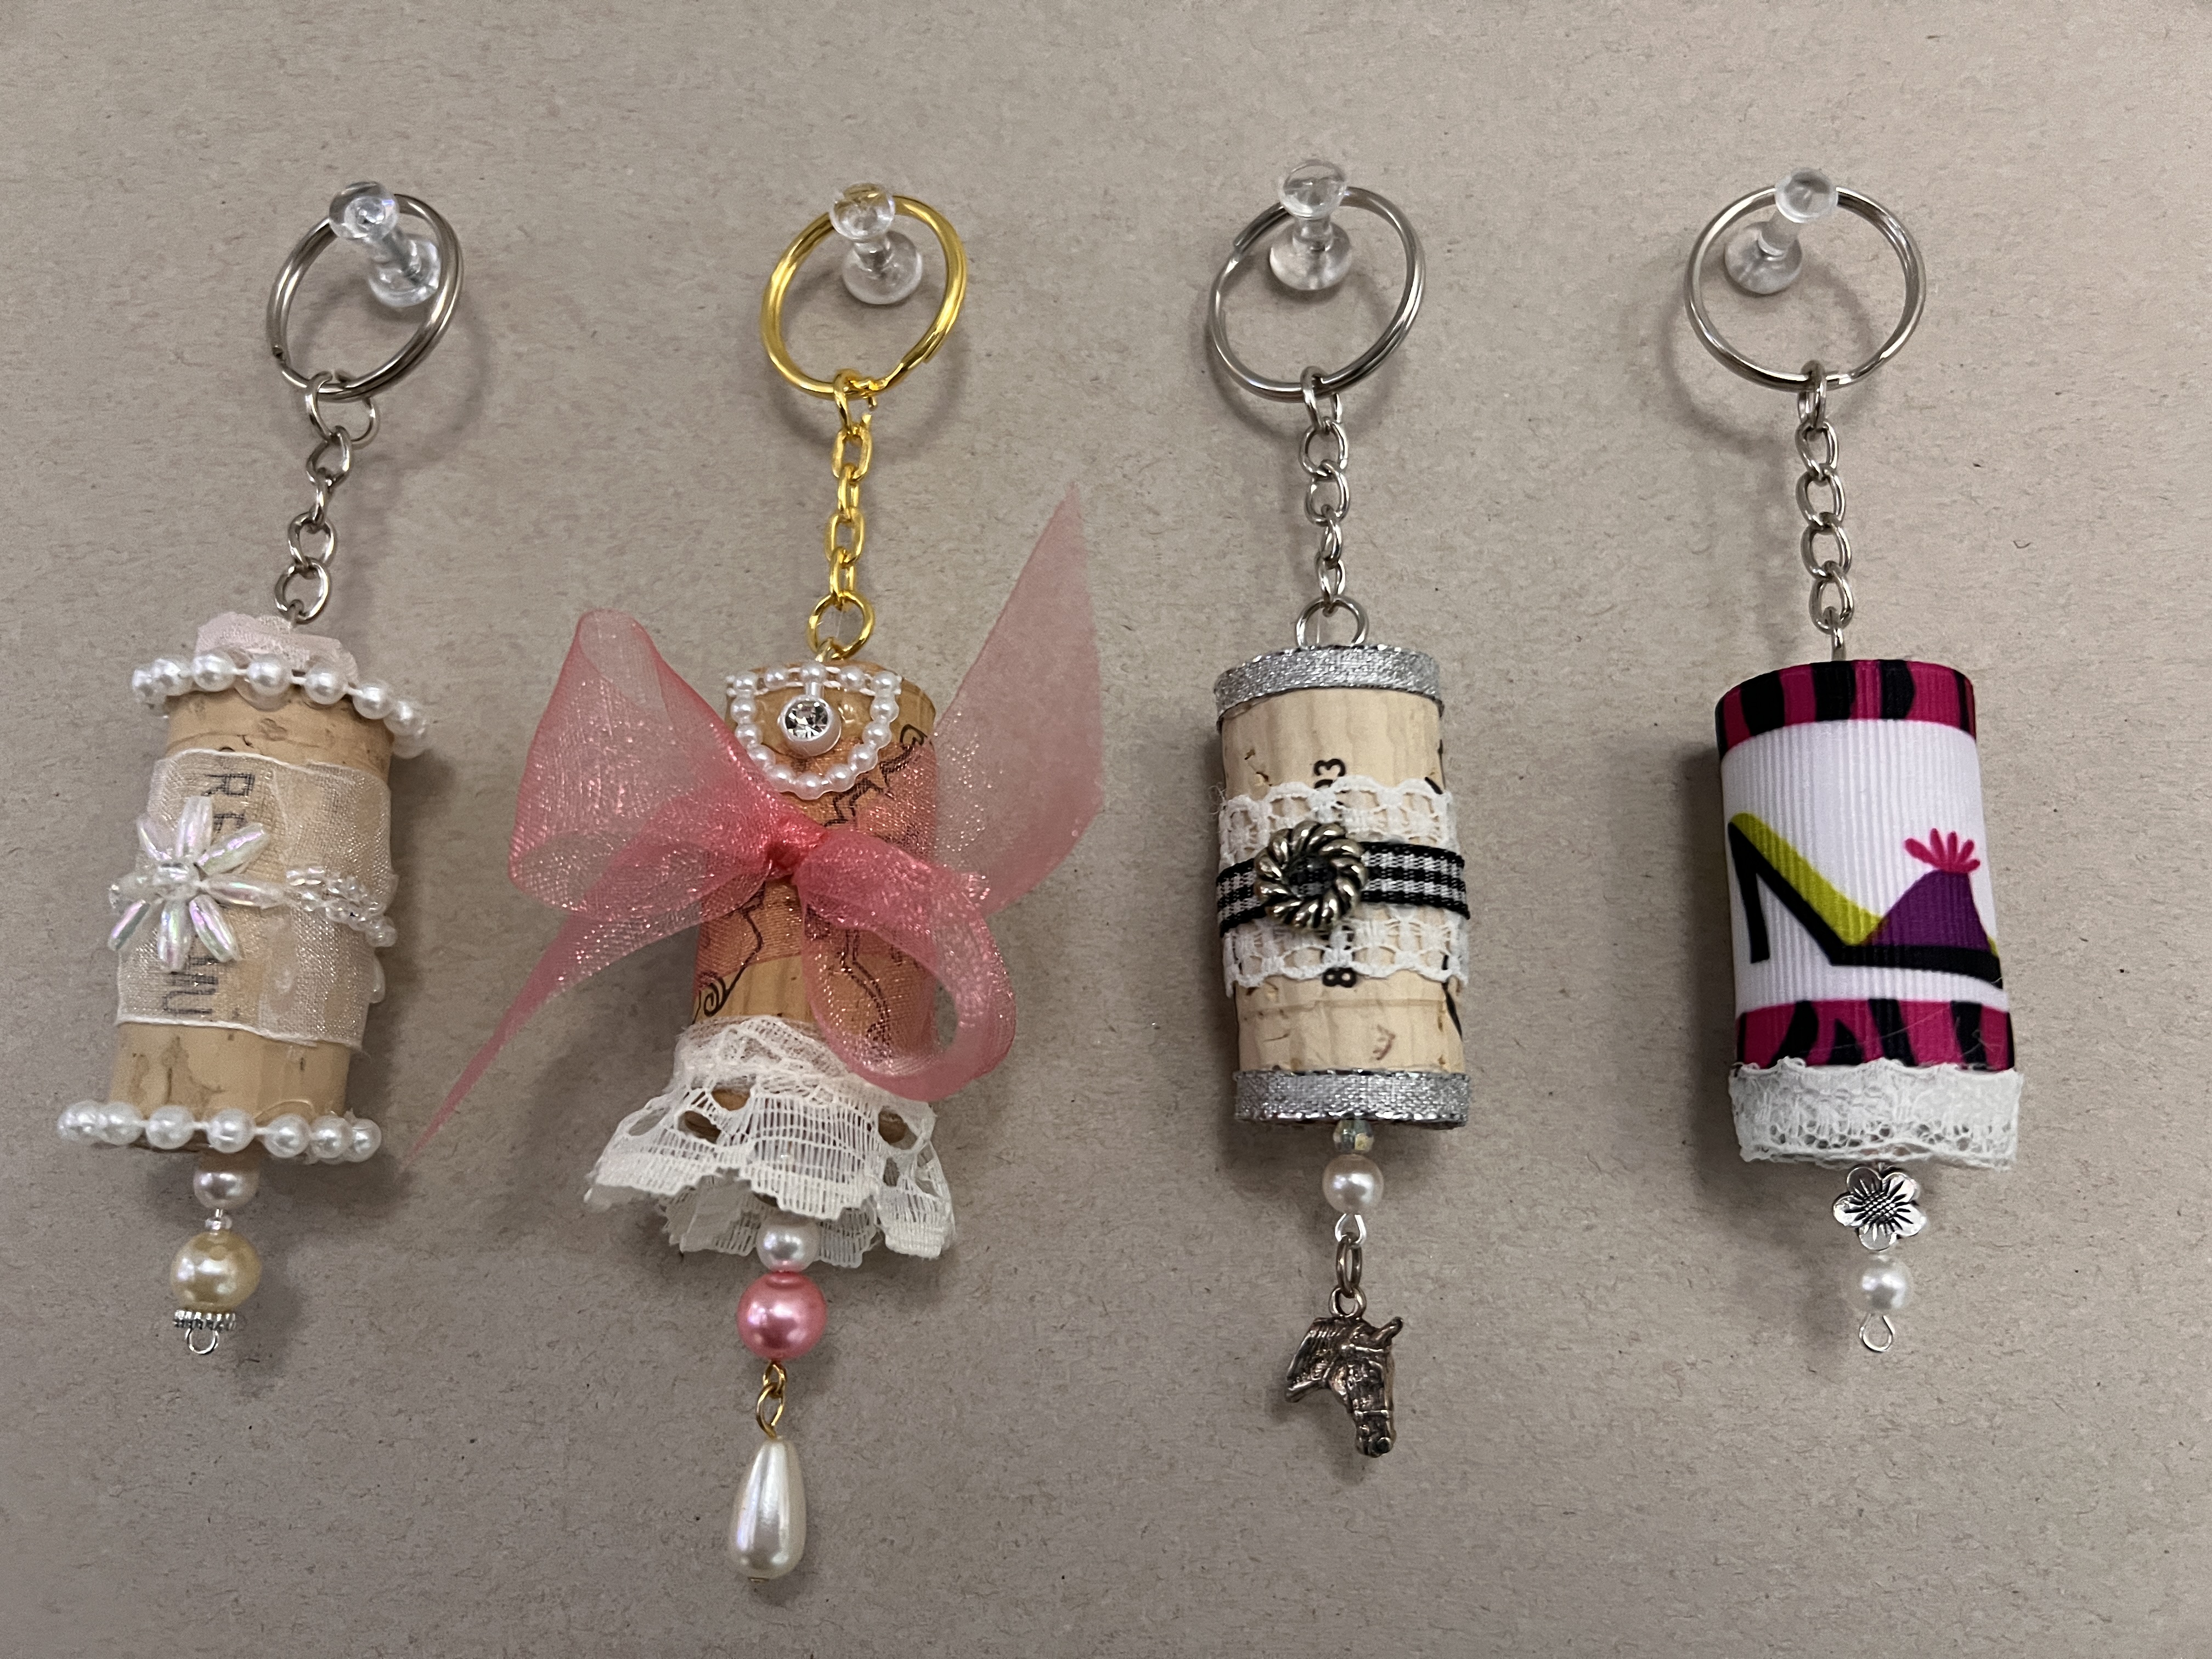 Four cork keychains decorated in whimsical designs